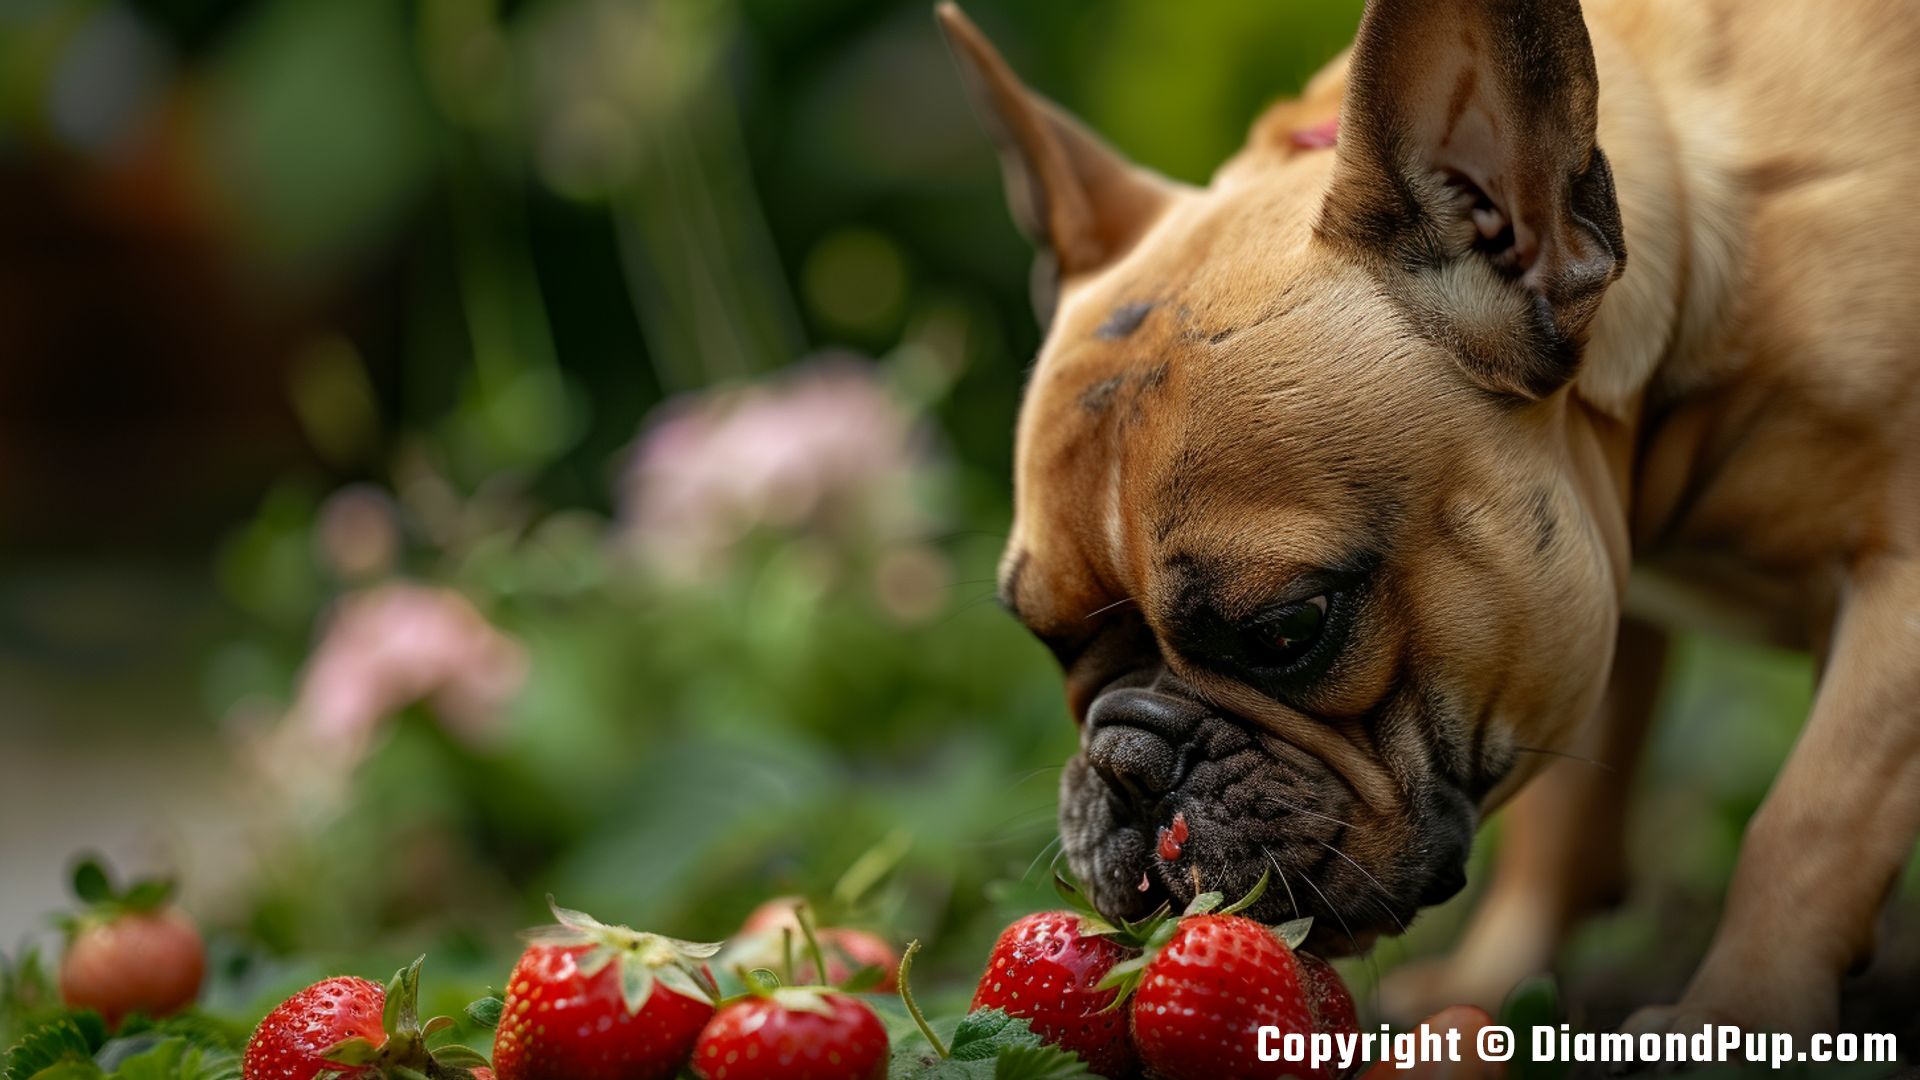 Image of a Cute French Bulldog Eating Strawberries